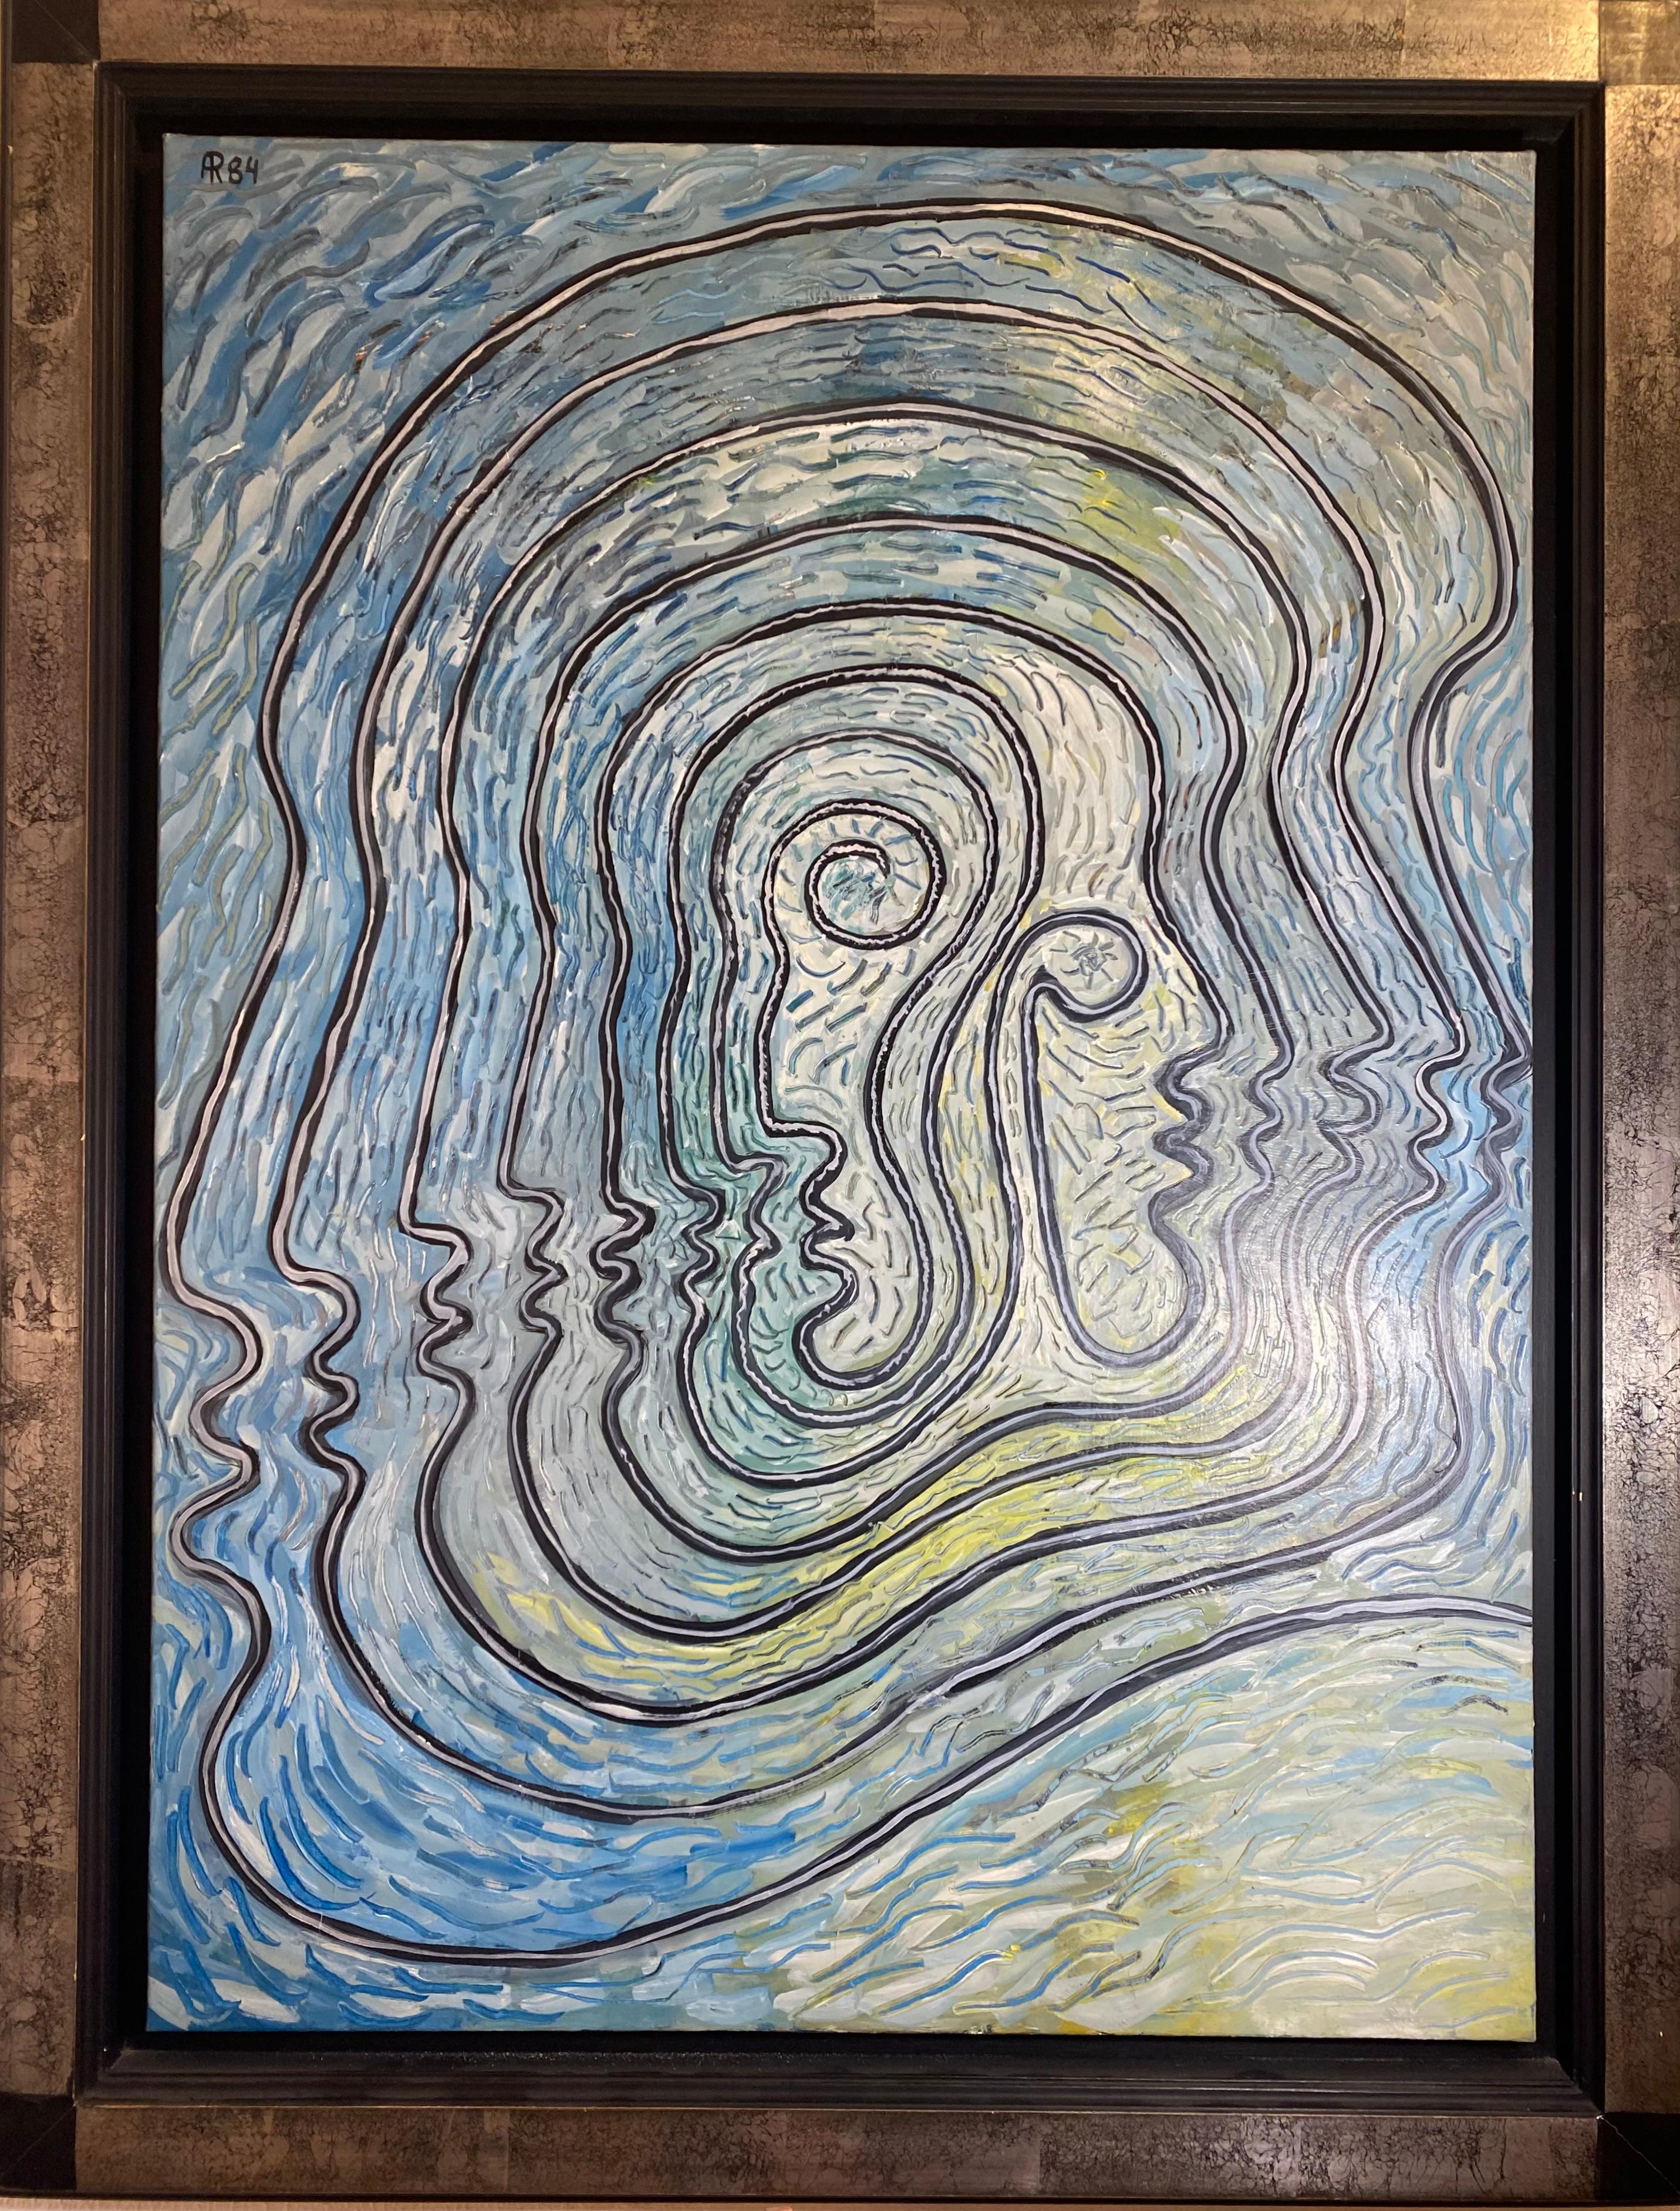 Painting Labyrinth - Alain Rothstein
Oil painting, water on canvas on frame
American box in silver wood
Signed AR84
1984
Dimensions without frame: 73 x 99 x 2 cm
Dimensions with frame: 92 x 106 x 3 cm
In very good condition.